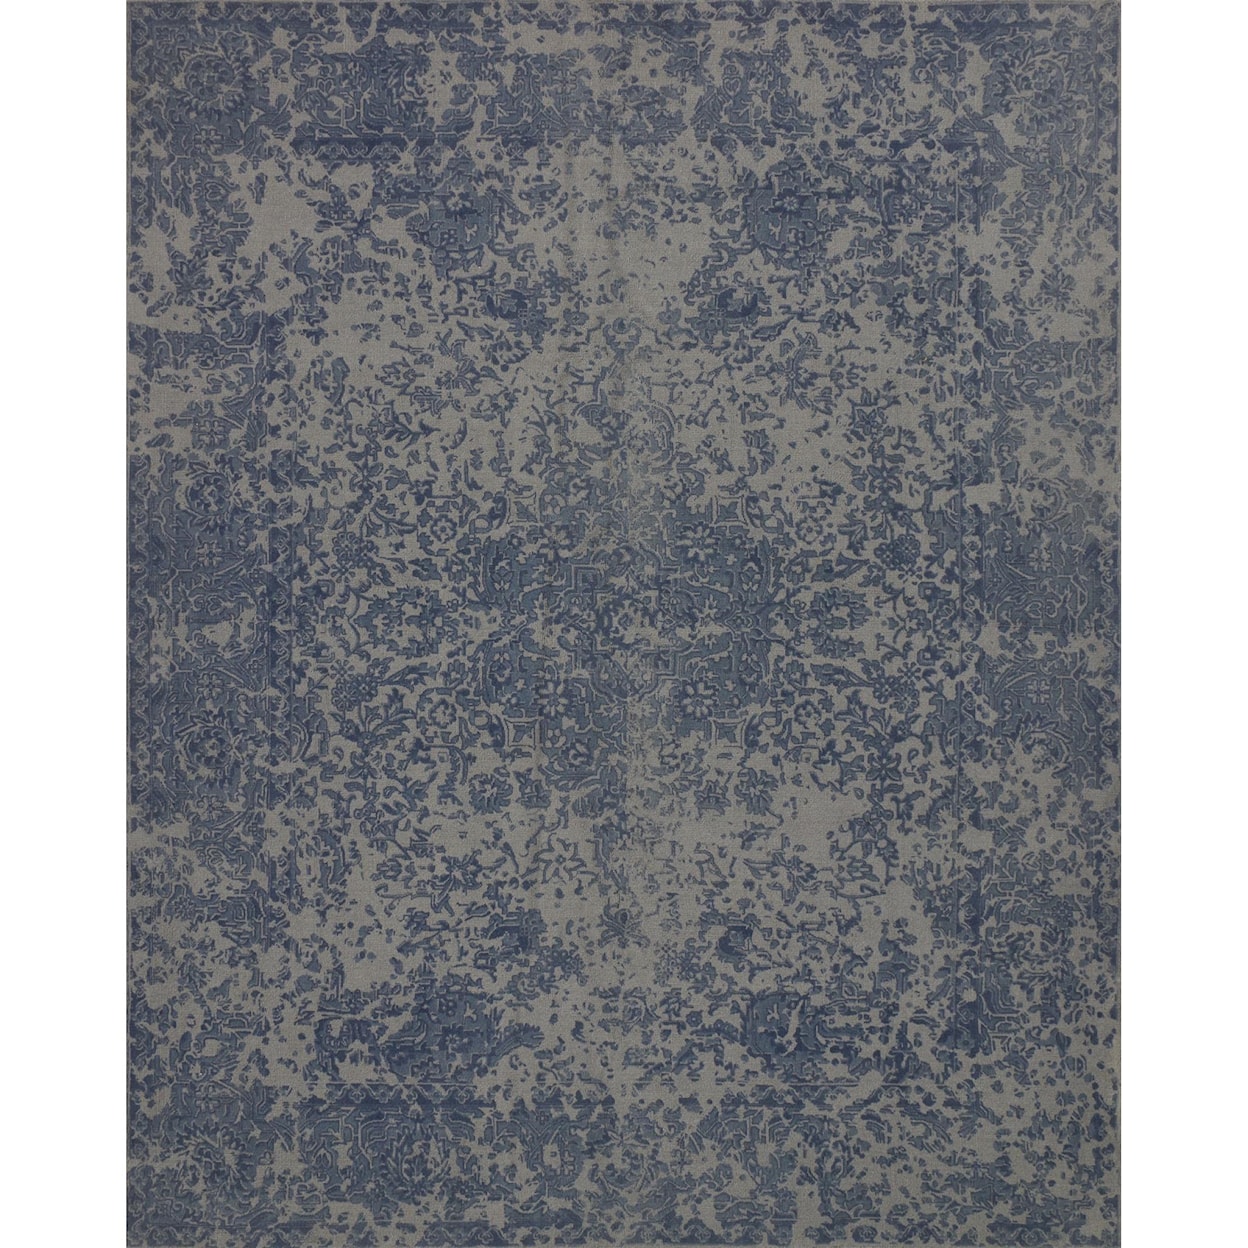 Magnolia Home by Joanna Gaines for Loloi Lily Park 3' 6" x 5' 6" Rectangle Rug